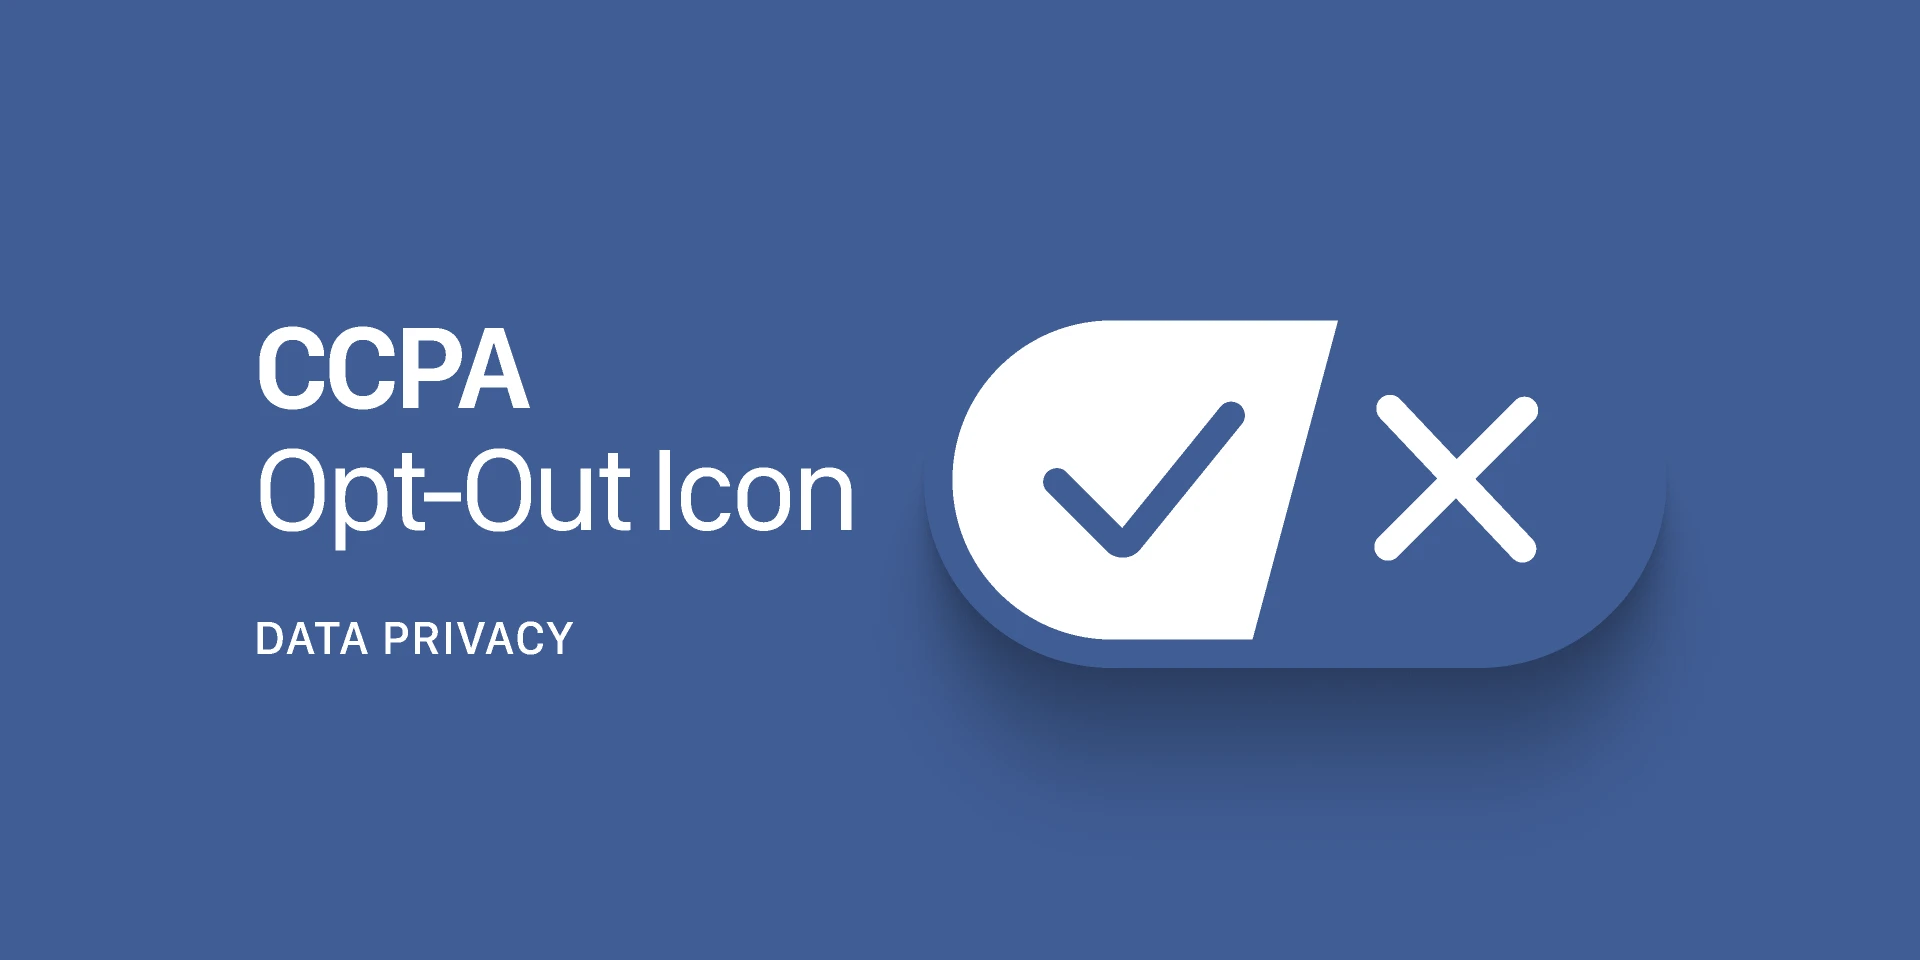 CCPA Privacy Regulations Opt-Out Icon for Figma and Adobe XD